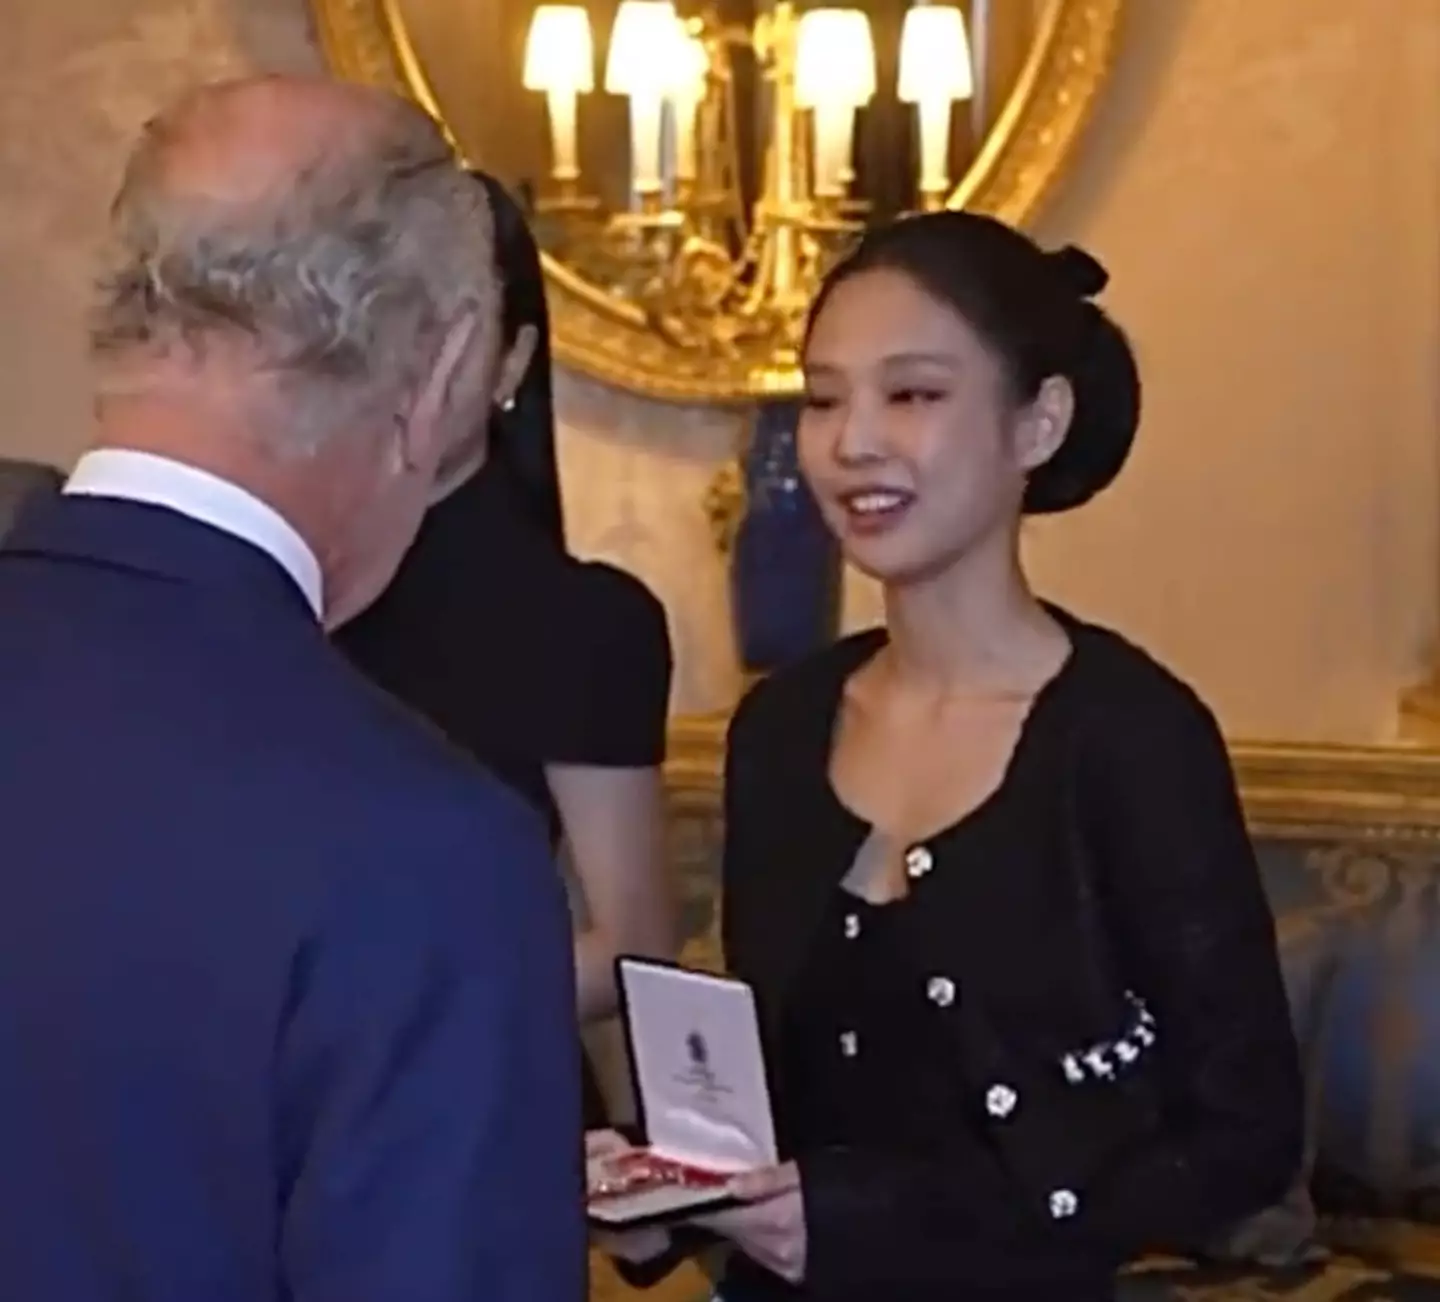 Jennie met with the King to receive her MBE.